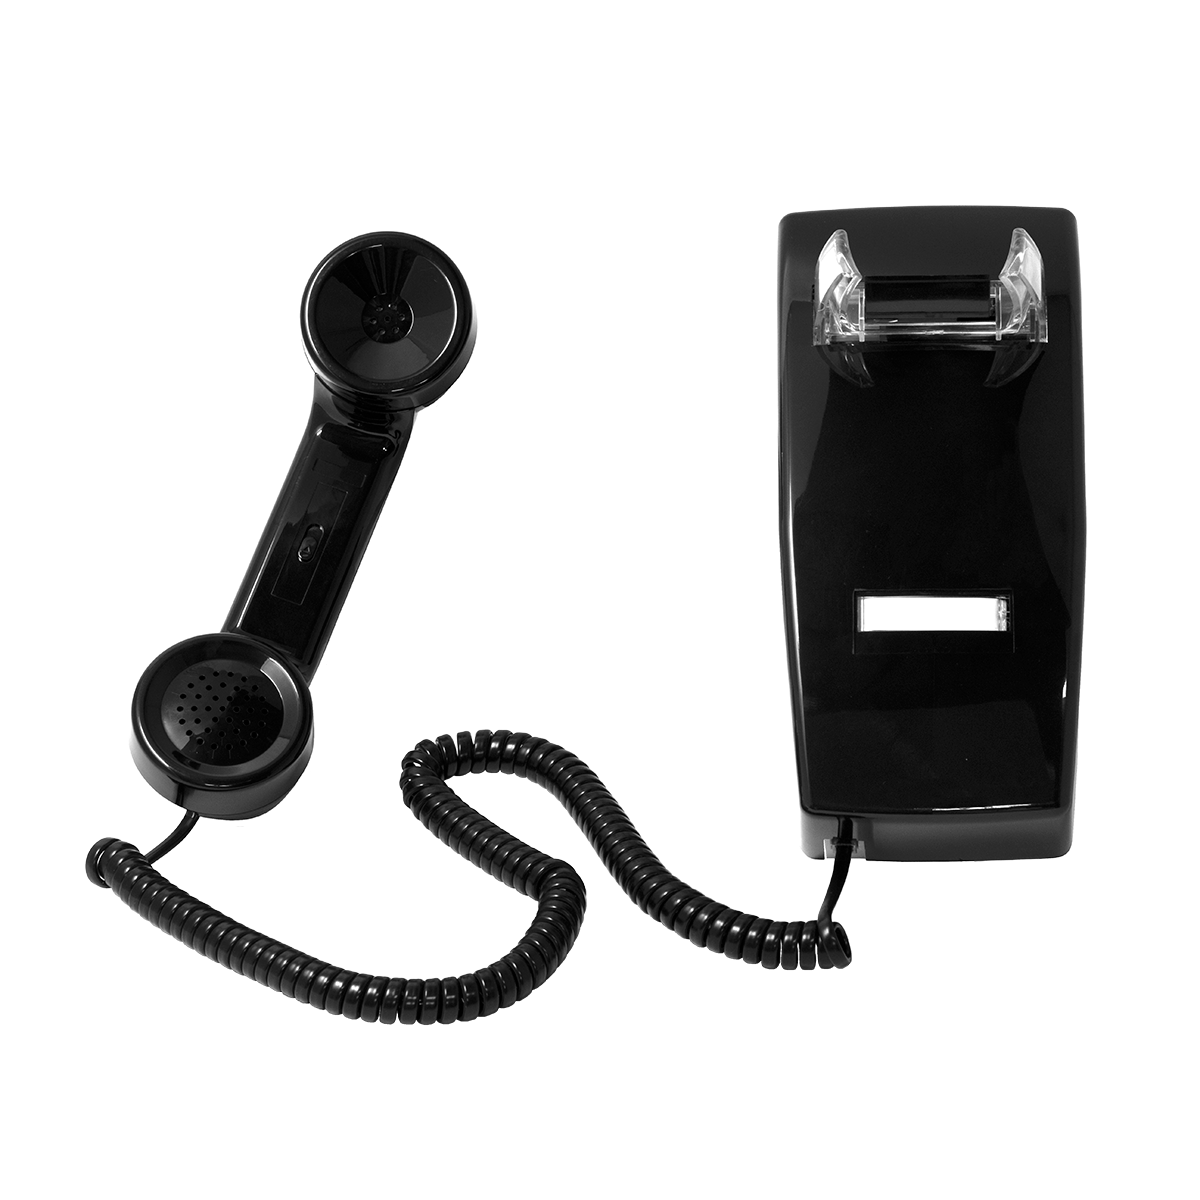 2554 Style Wall Phone No-Dial (Black)